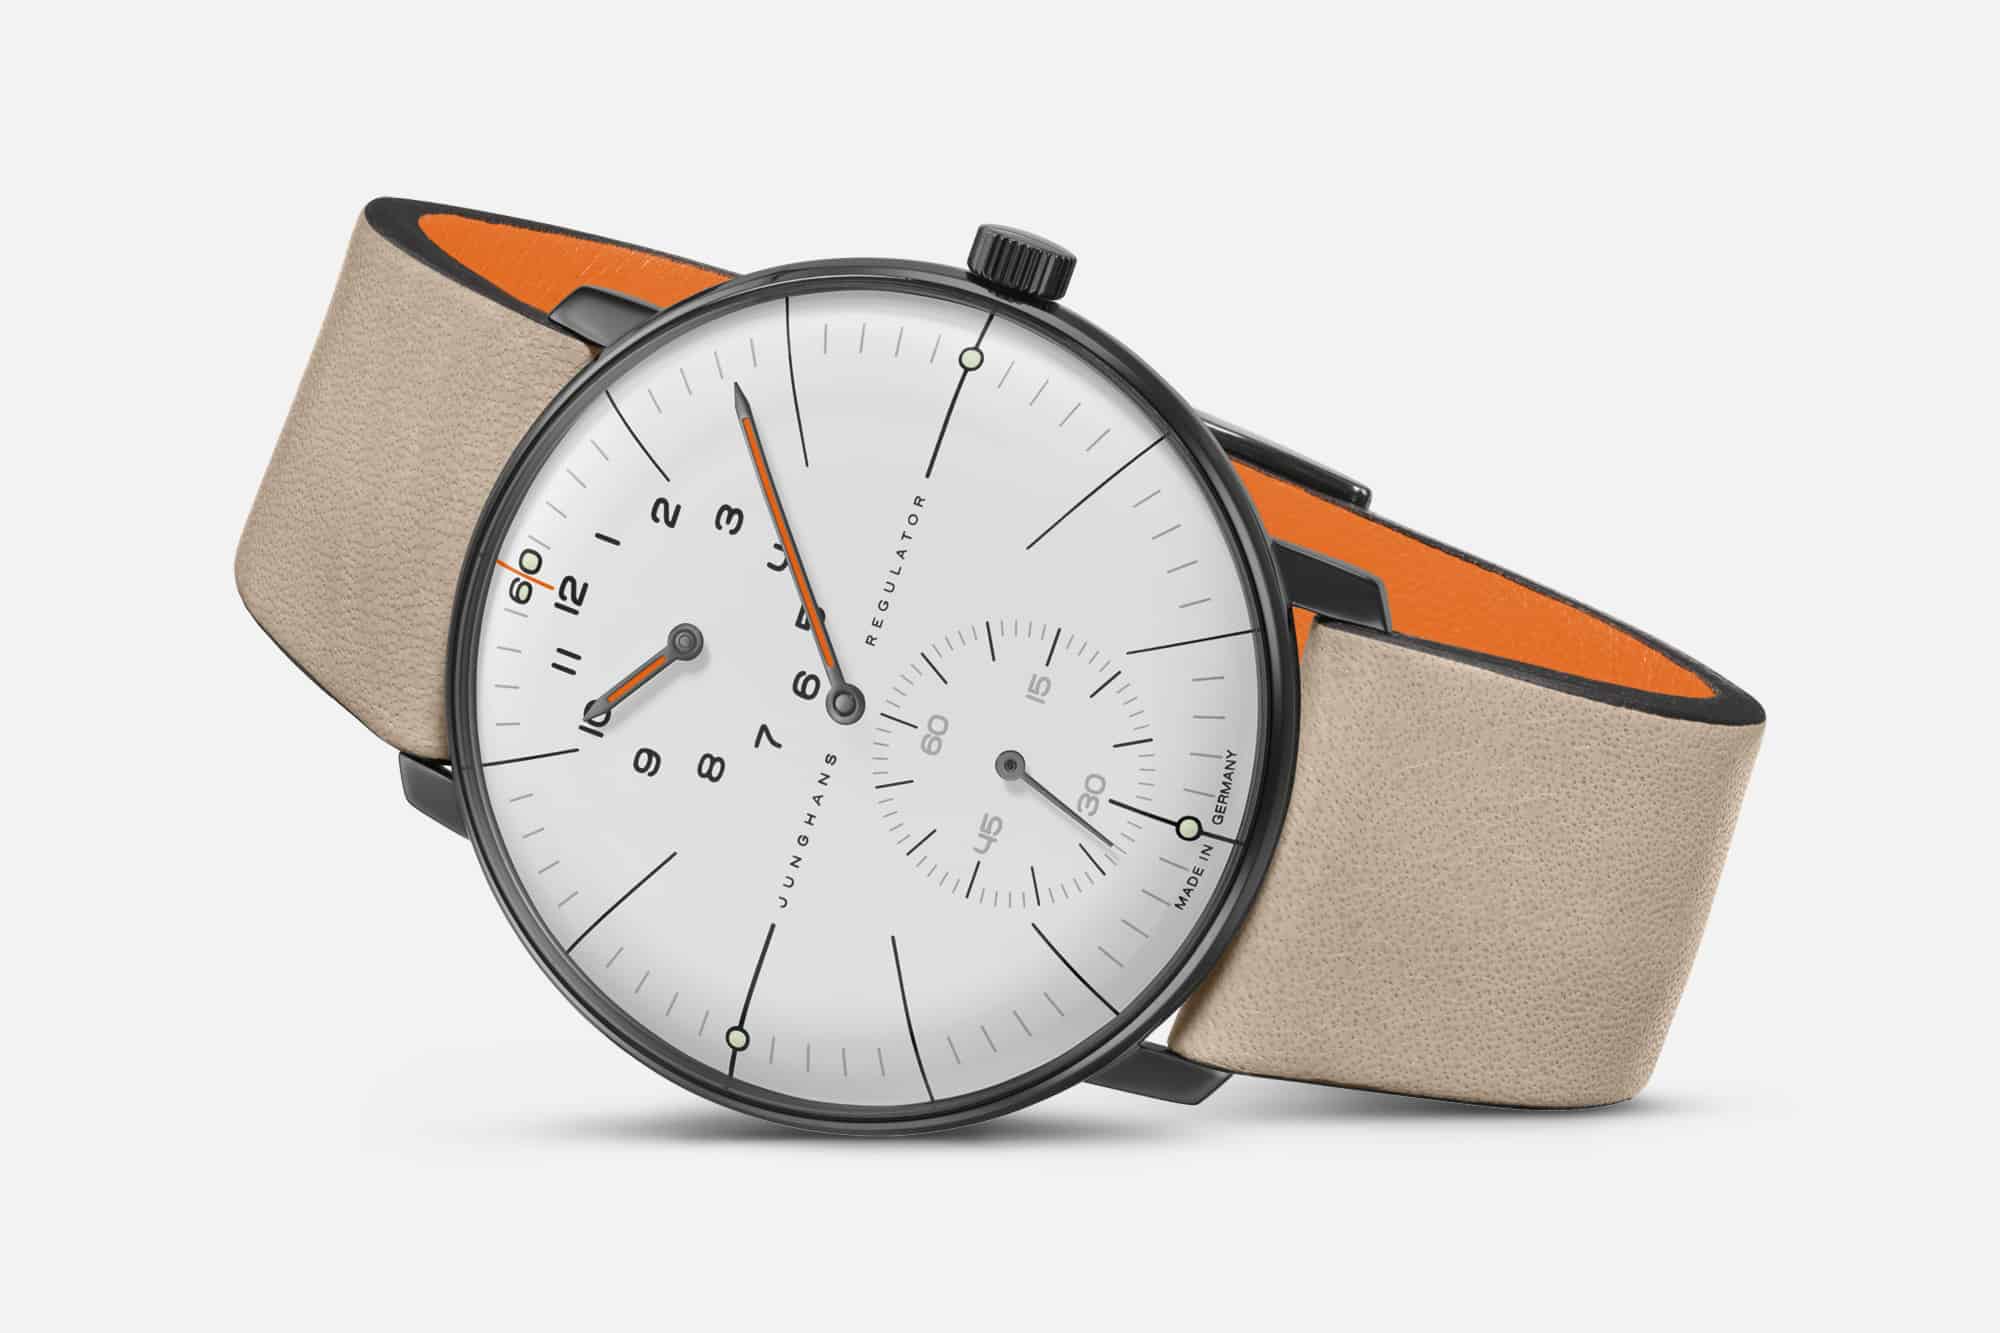 Junghans Introduces a New Limited Edition Box Set to Commemorate 60 Years of the Max Bill Watch